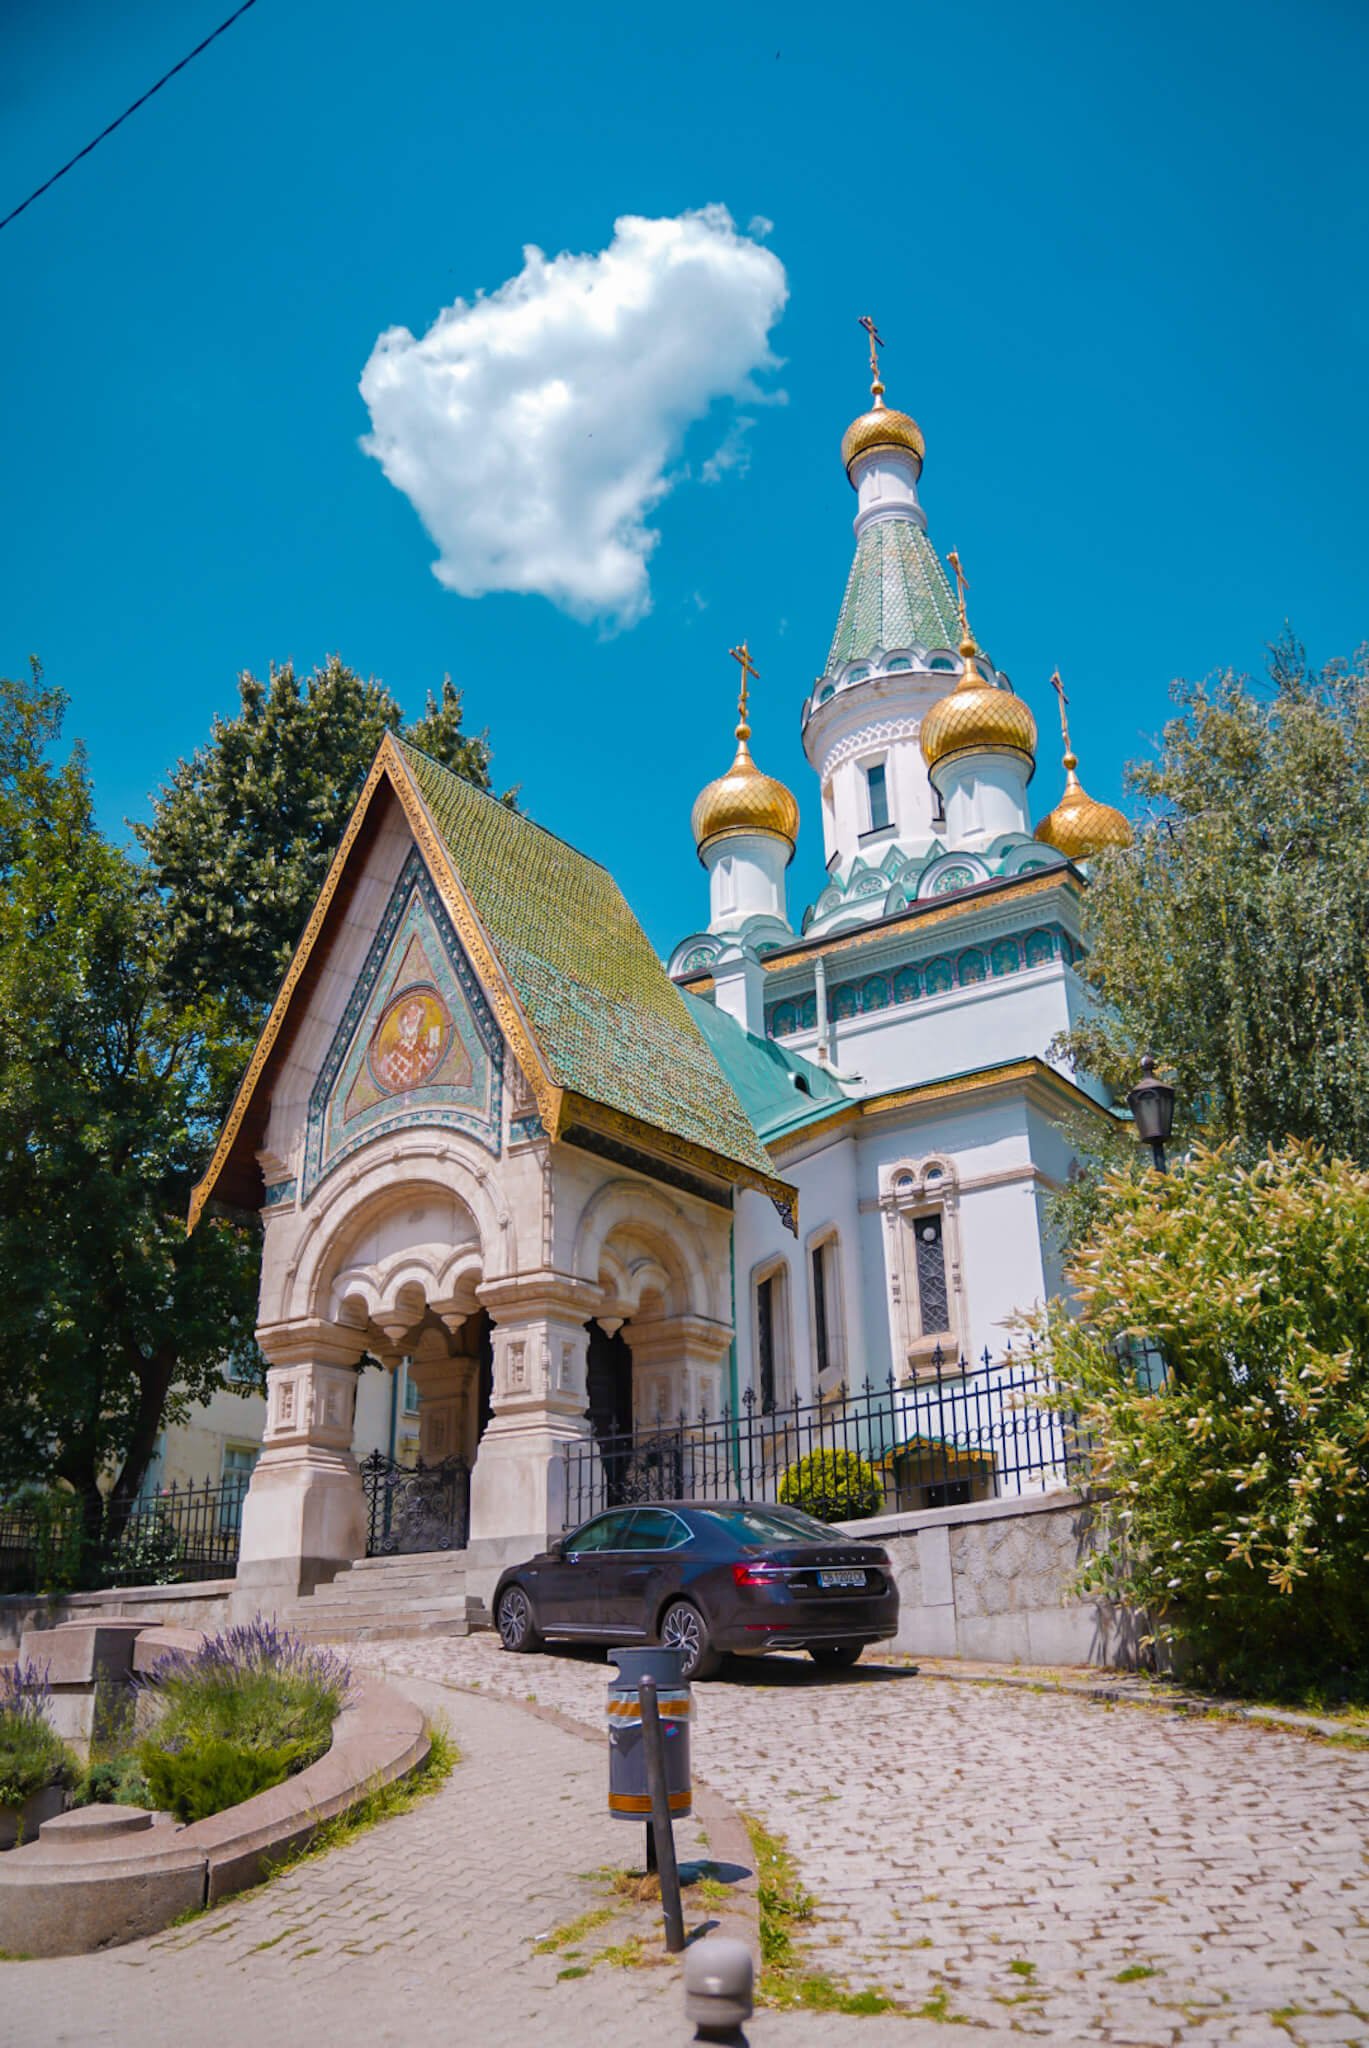 Church of St Nicholas the Miracle, is Sofia, Bulgaria worth visiting pin